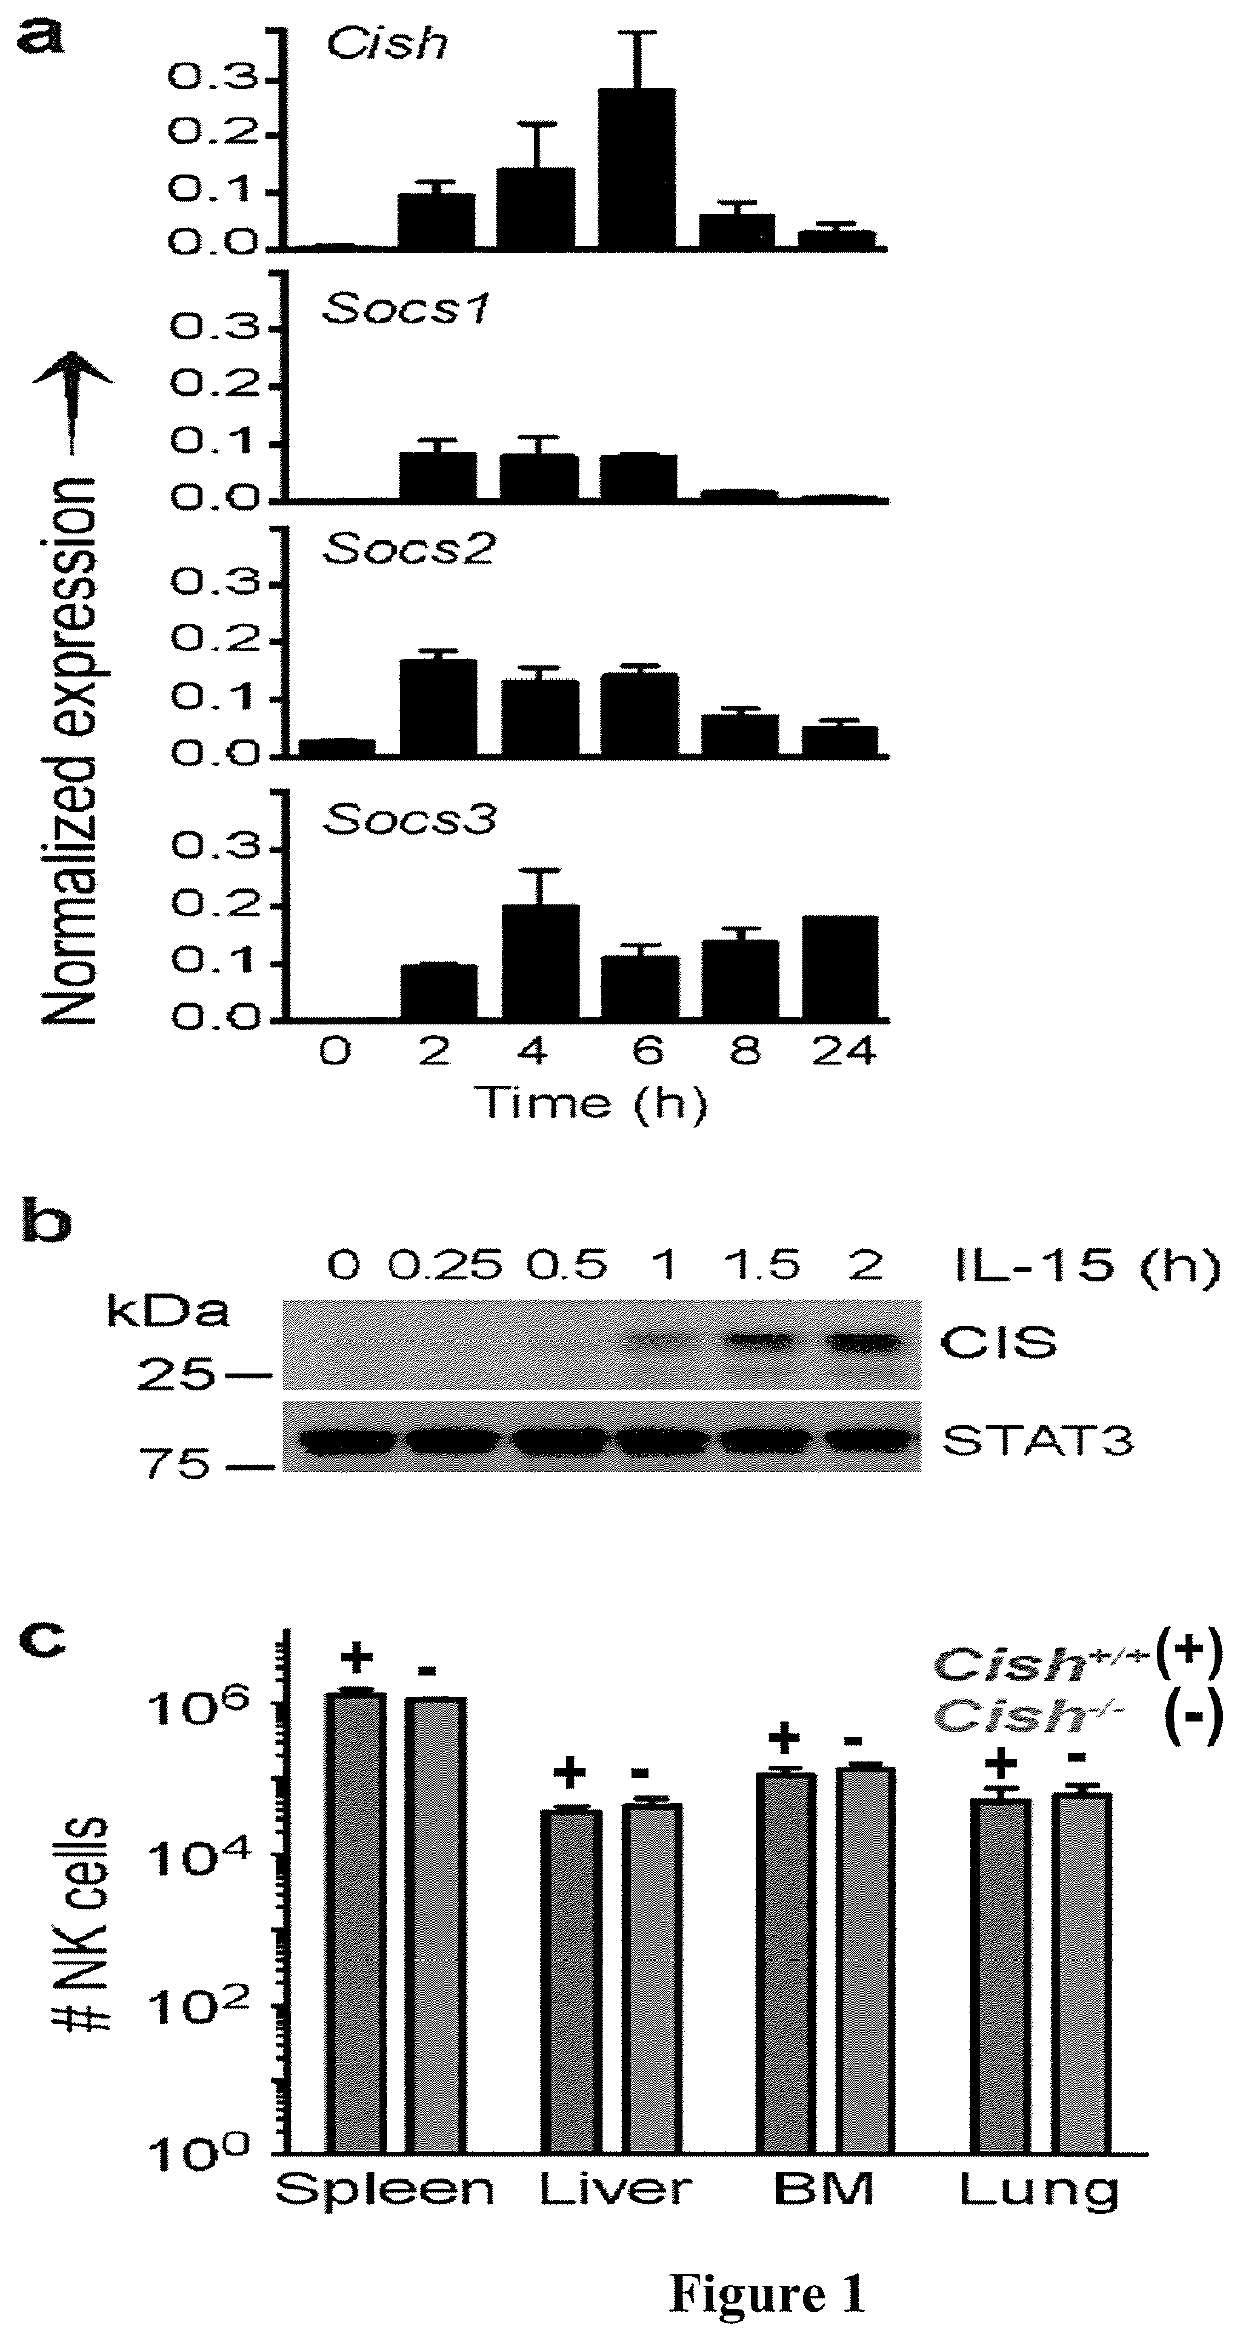 Inhibition of cytokine-induced SH2 protein in NK cells